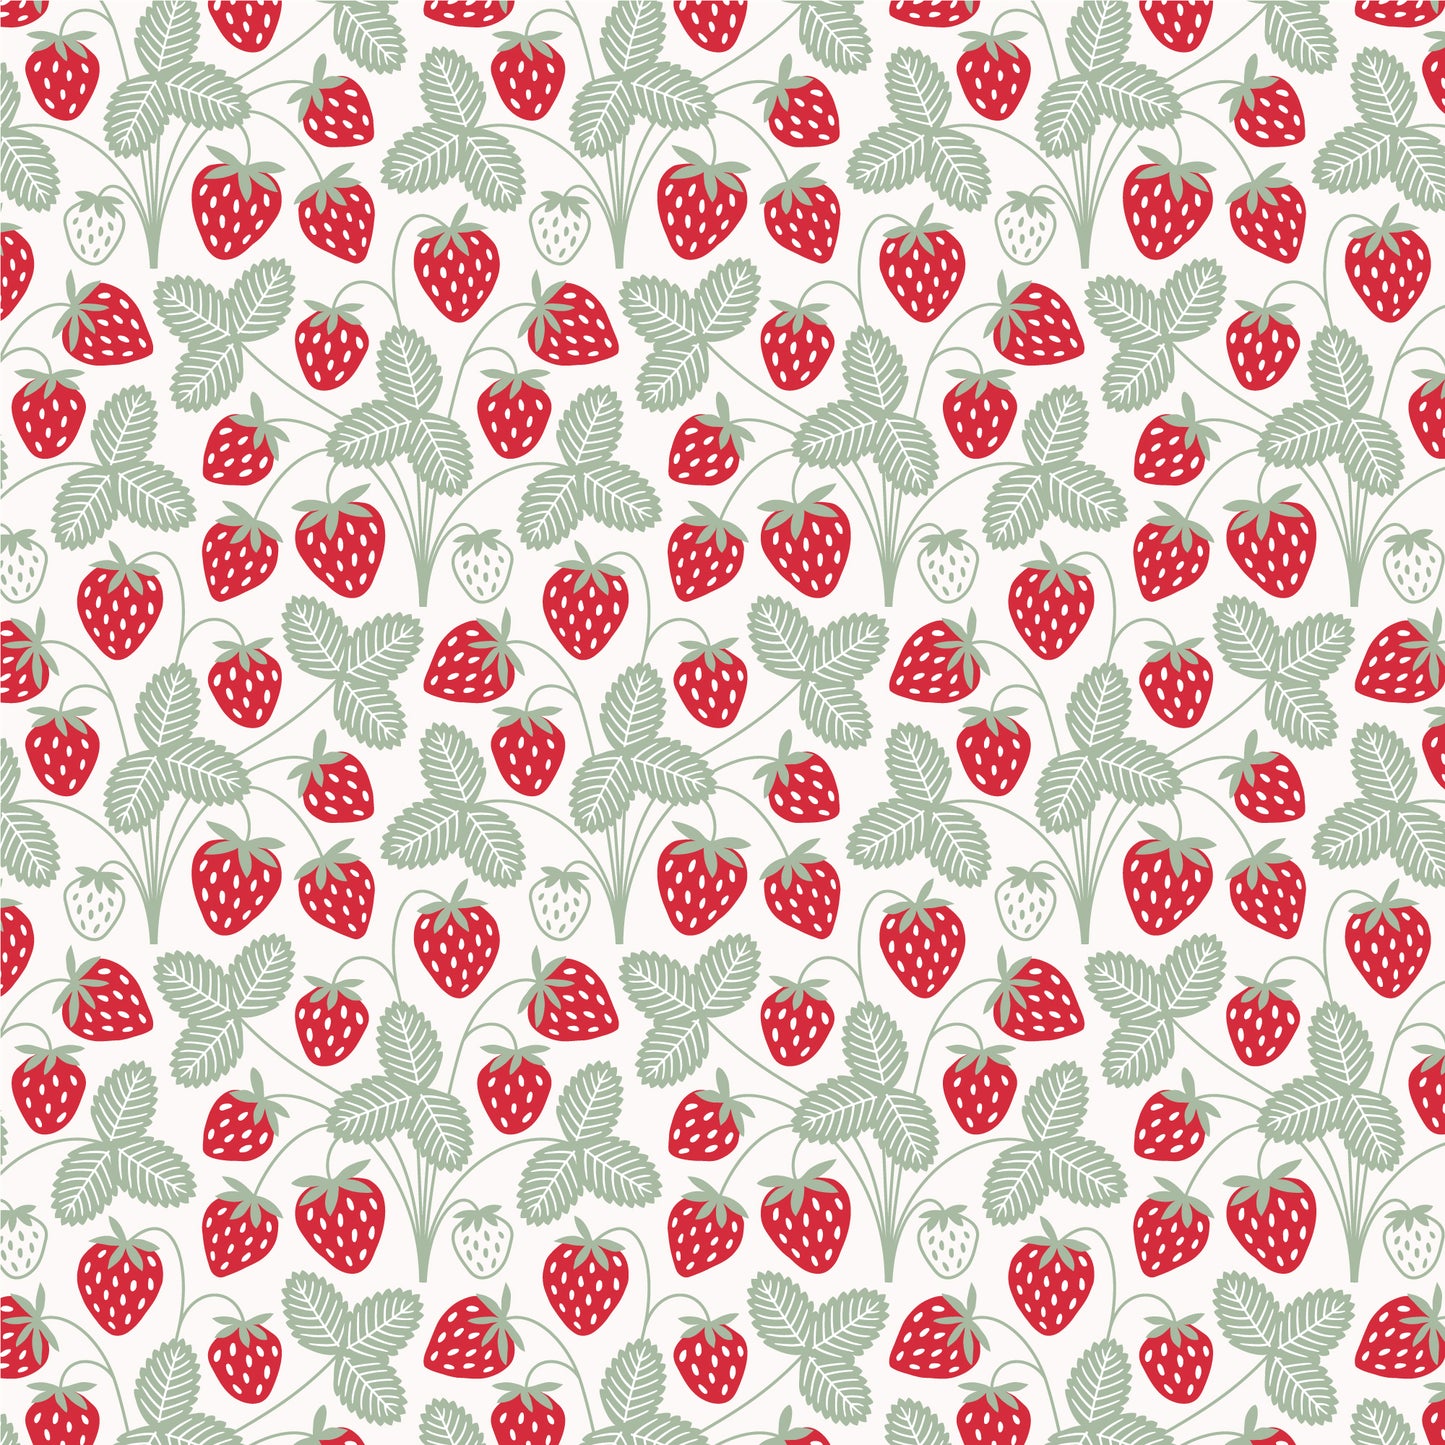 French Terry Blanket - Strawberries Red & Green